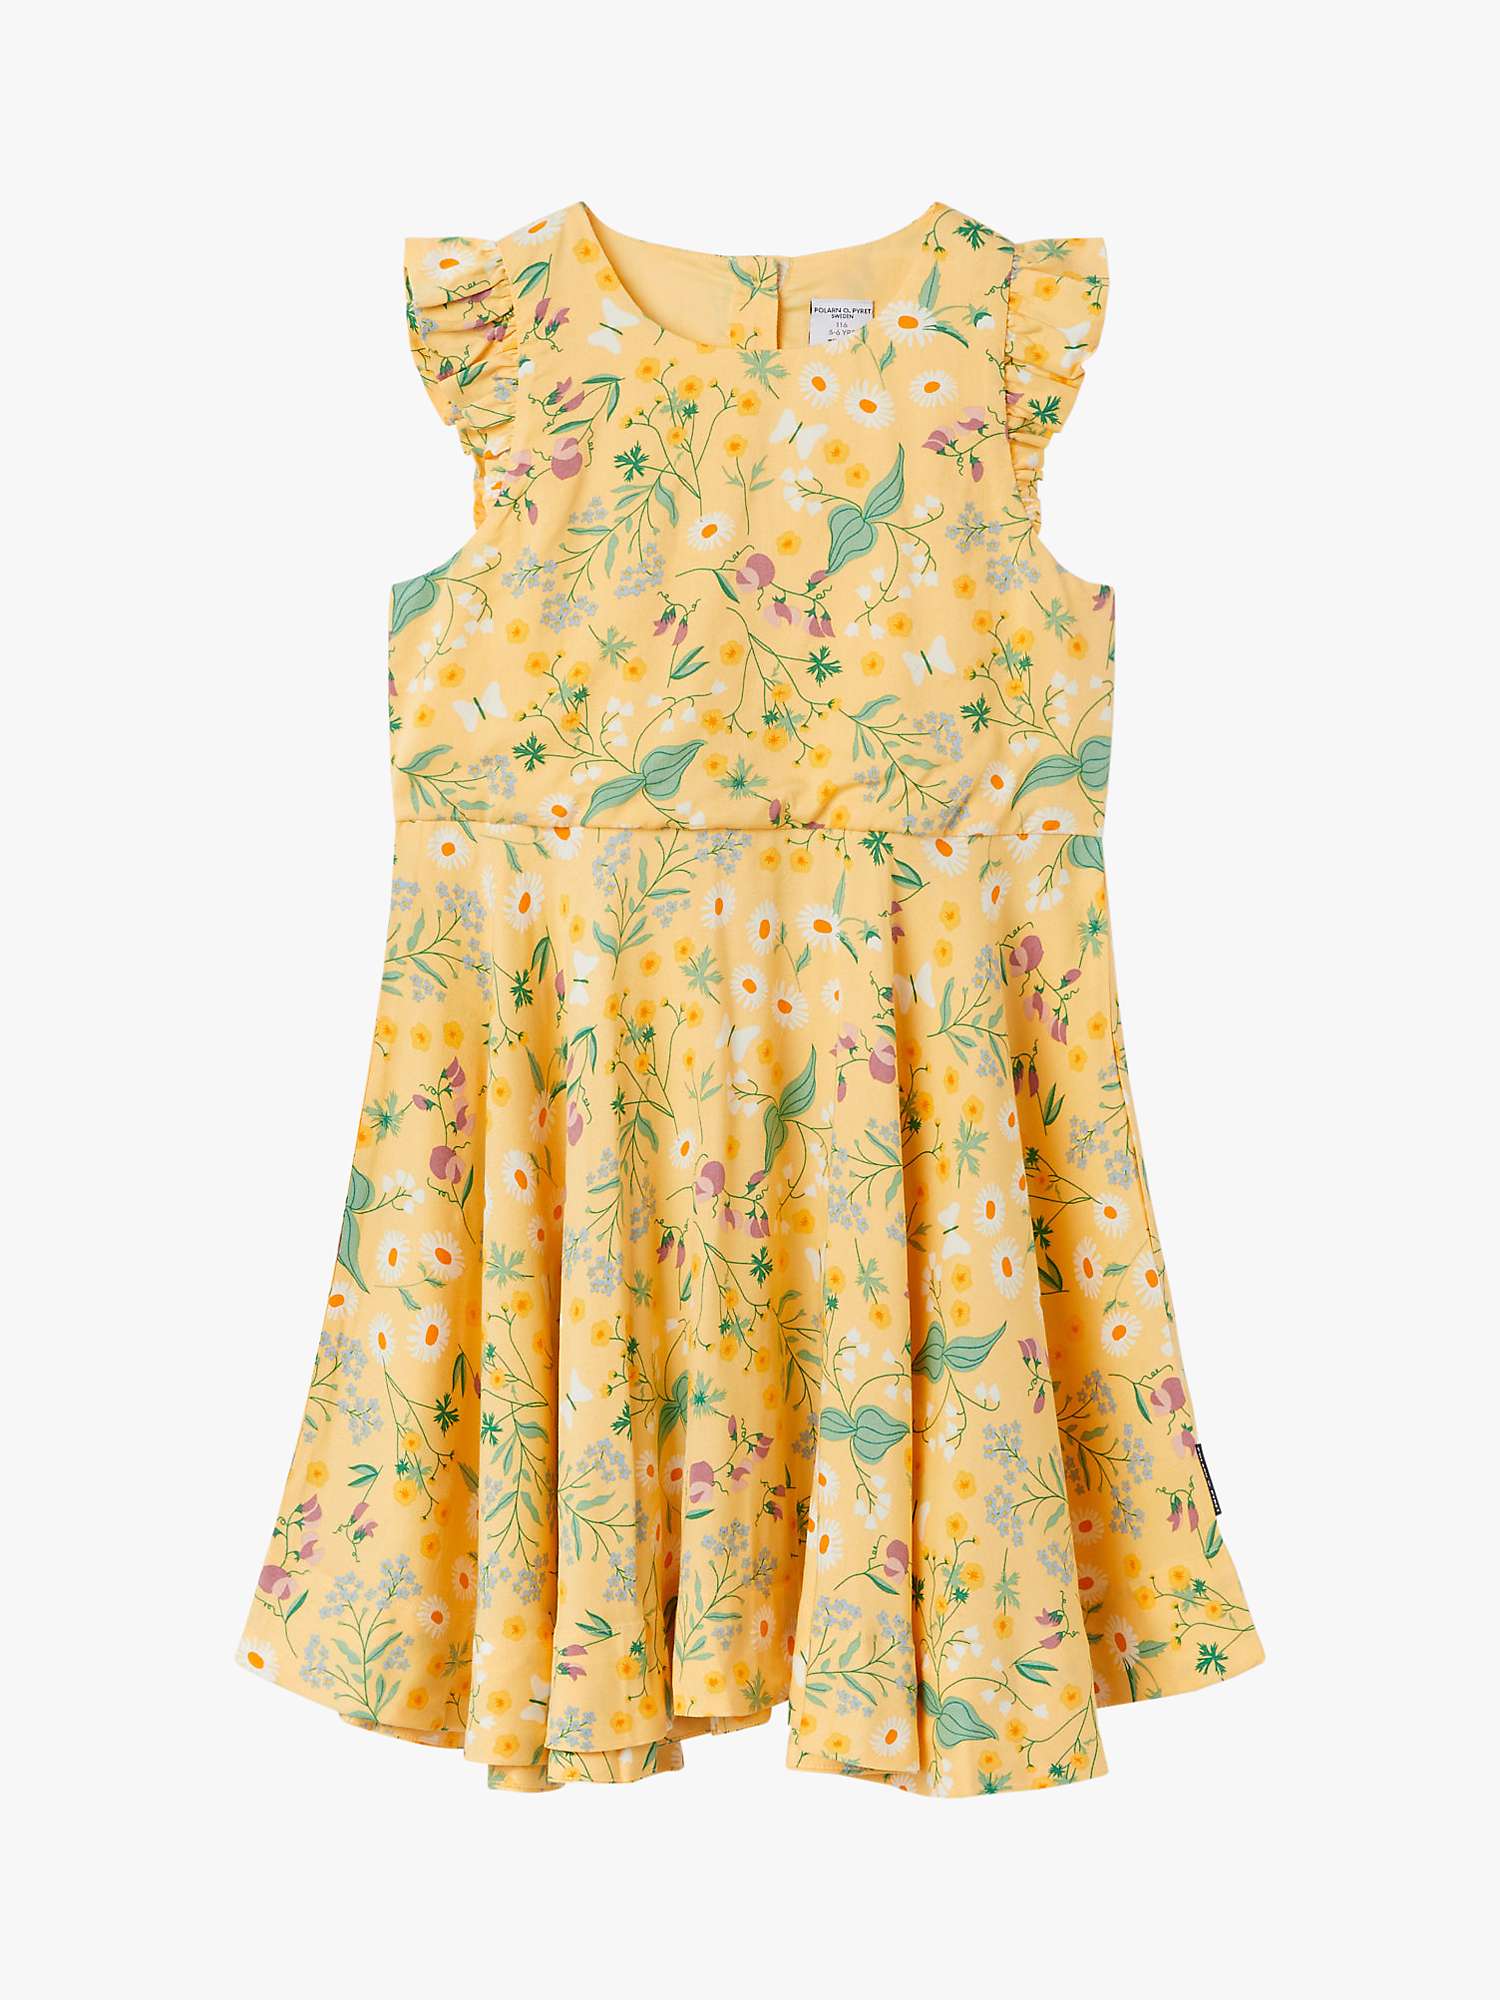 Buy Polarn O. Pyret Baby Floral Dress, Yellow Online at johnlewis.com